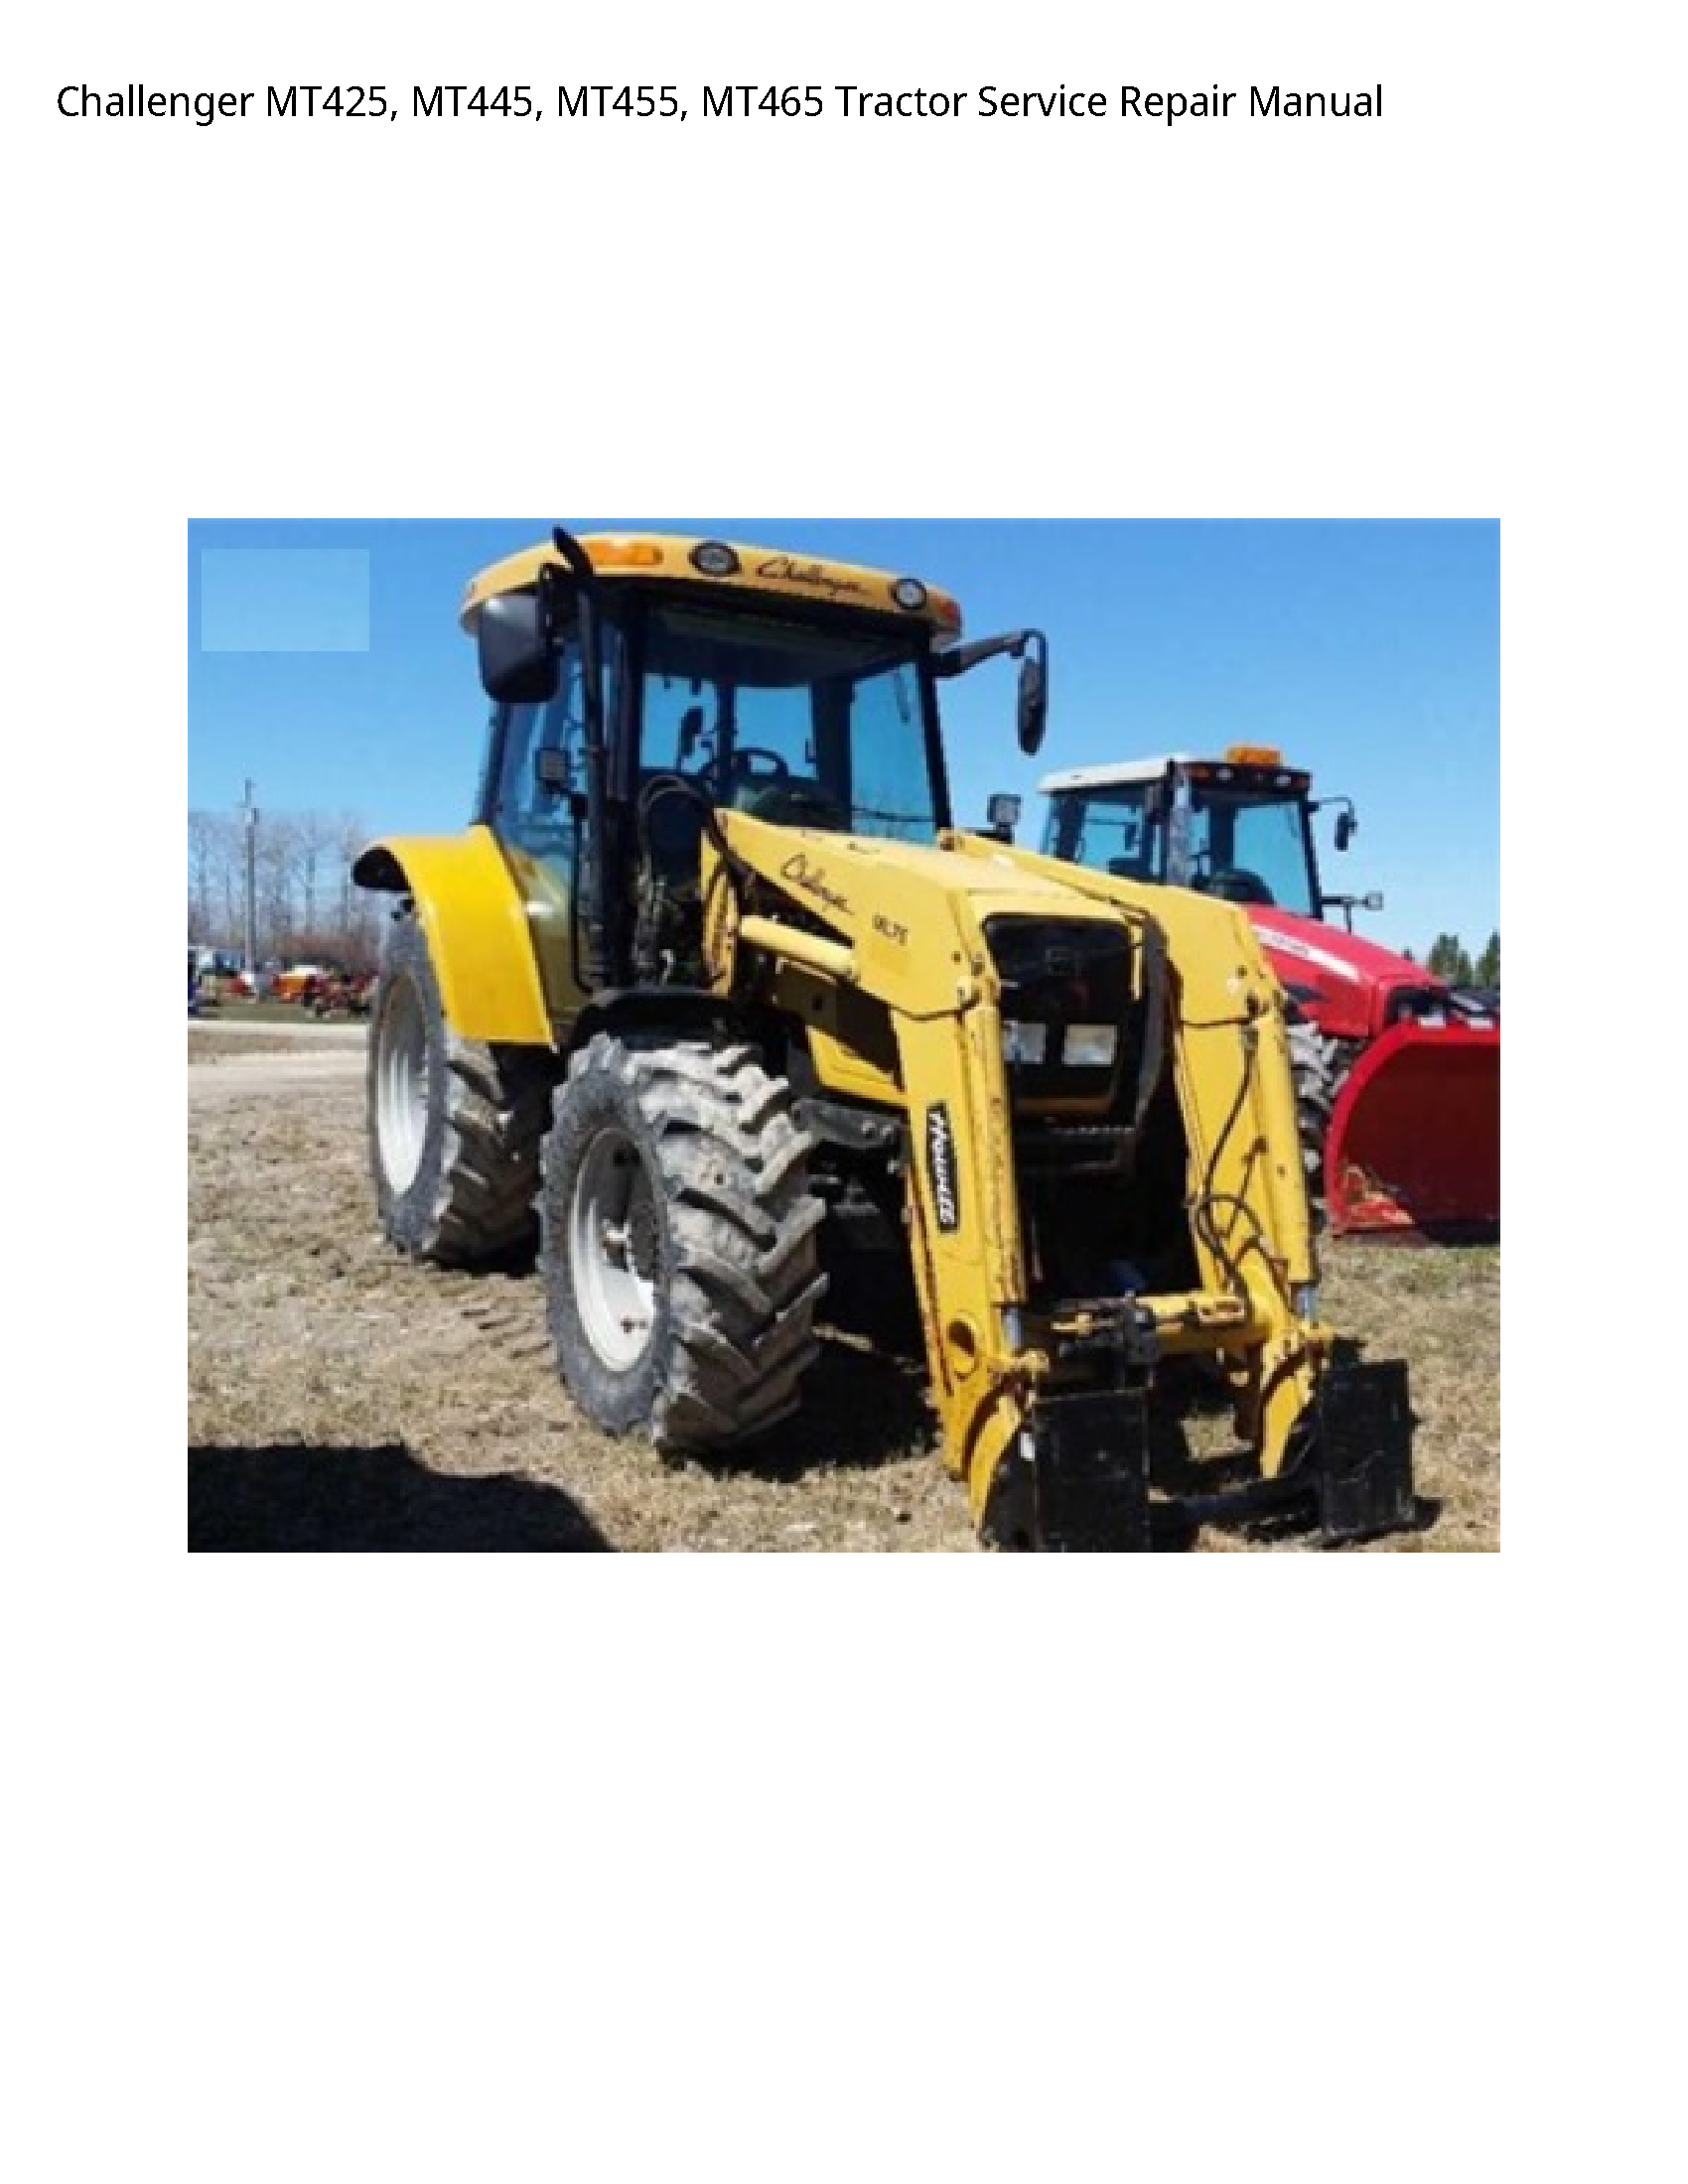 Challenger MT425 Tractor manual